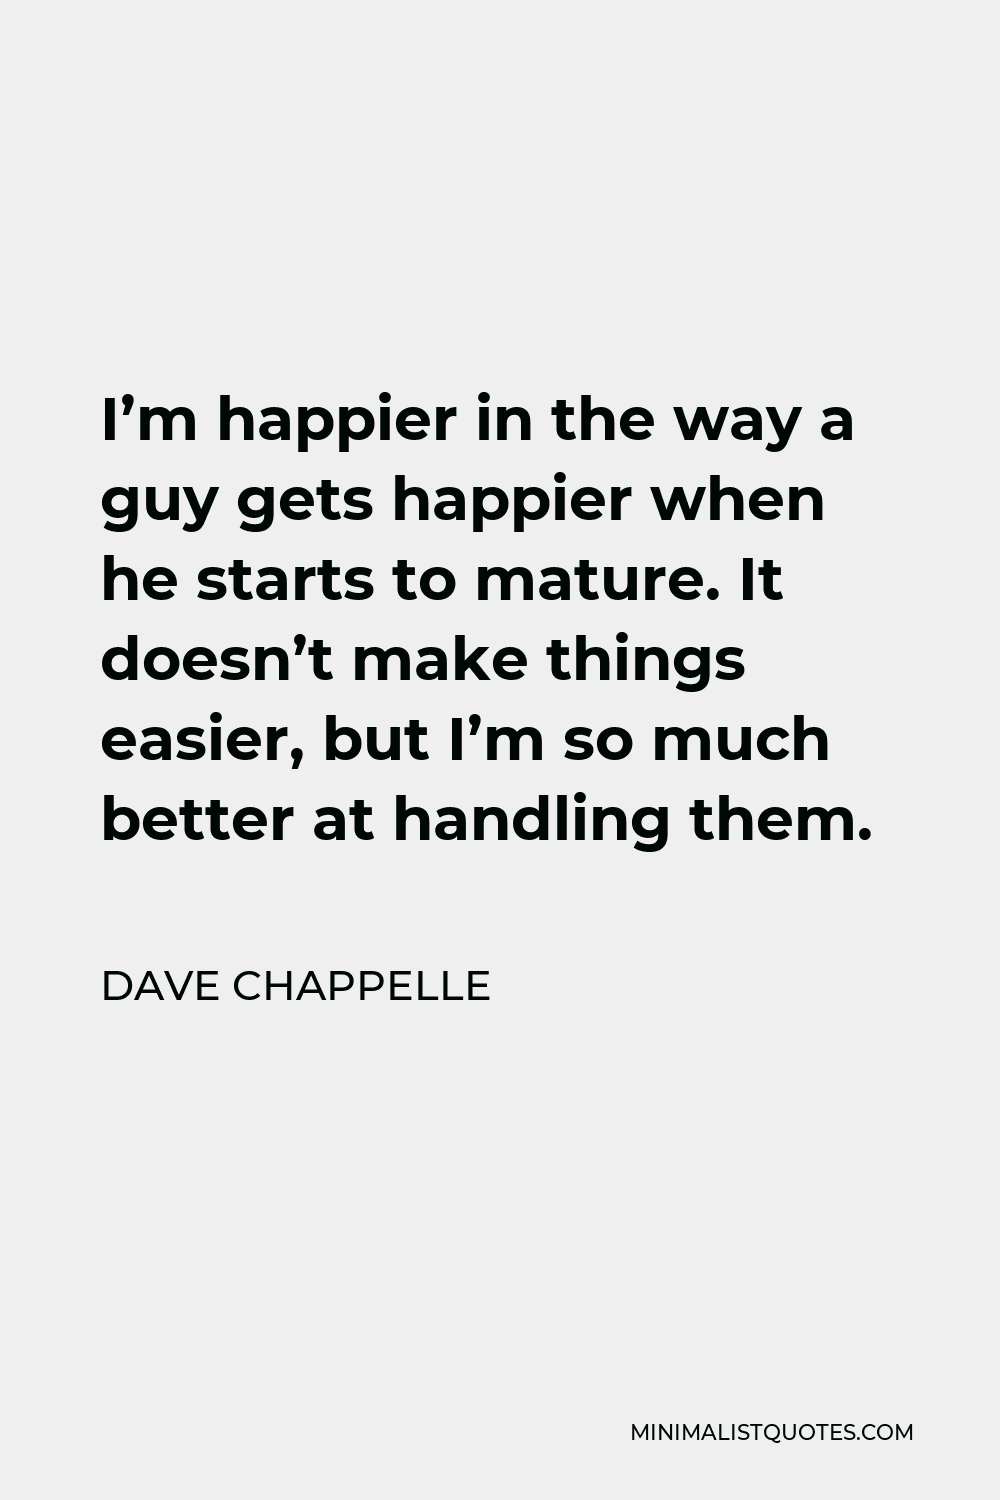 Dave Chappelle Quote - I’m happier in the way a guy gets happier when he starts to mature. It doesn’t make things easier, but I’m so much better at handling them.